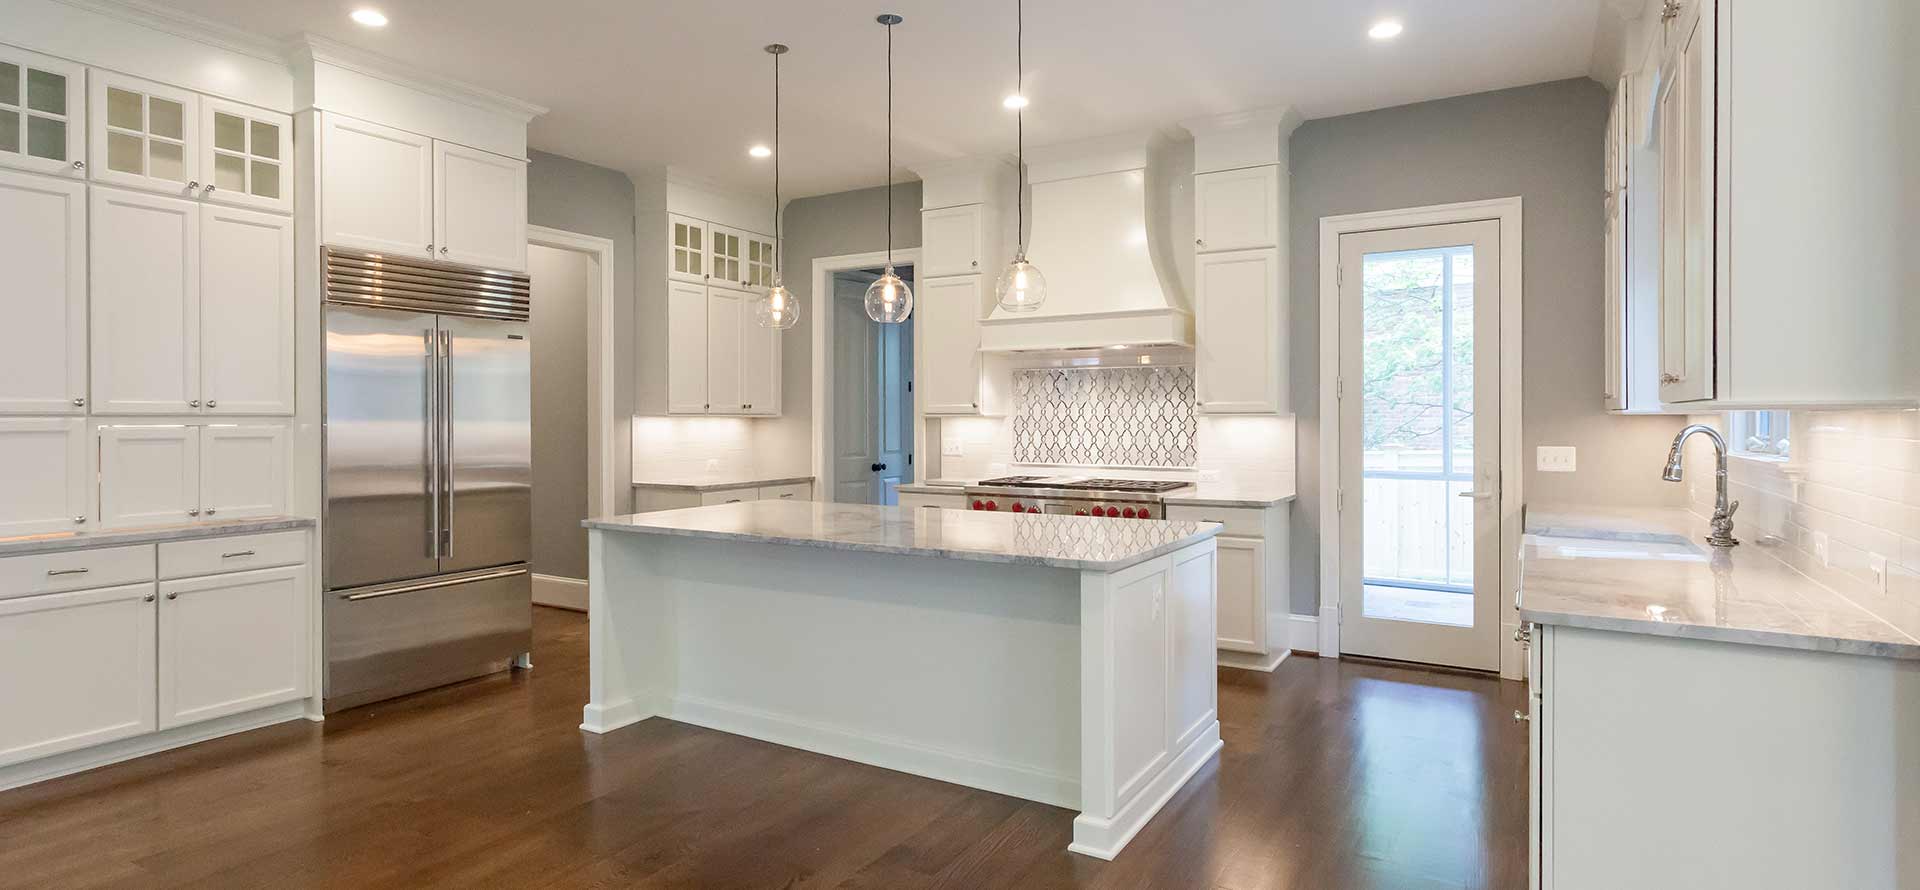 Kitchen Cabinets and designer in Ocean City, MD.